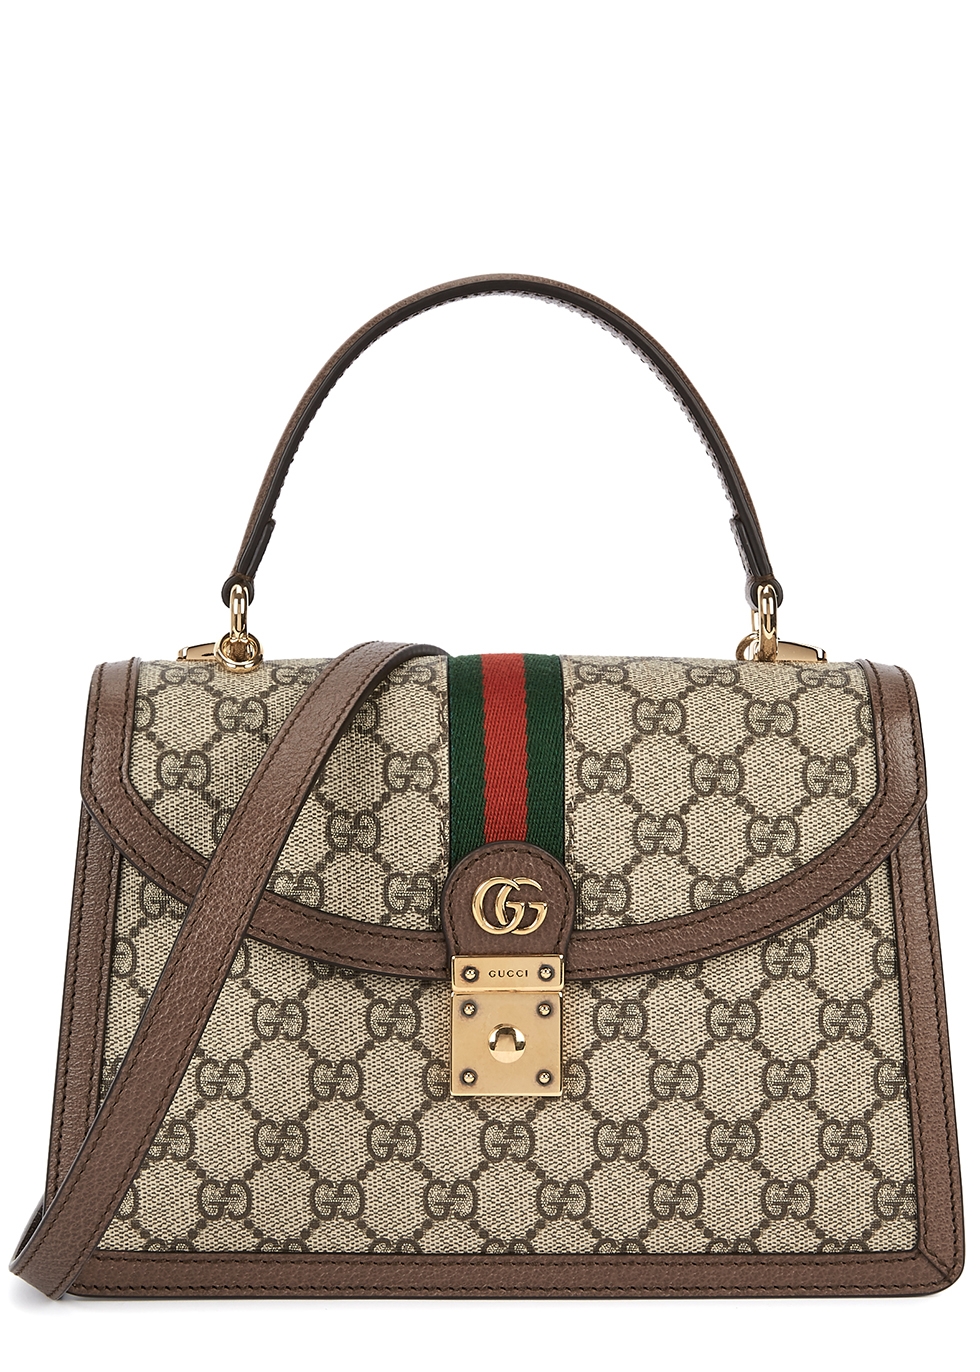 Gucci Ophidia GG monogrammed top handle 